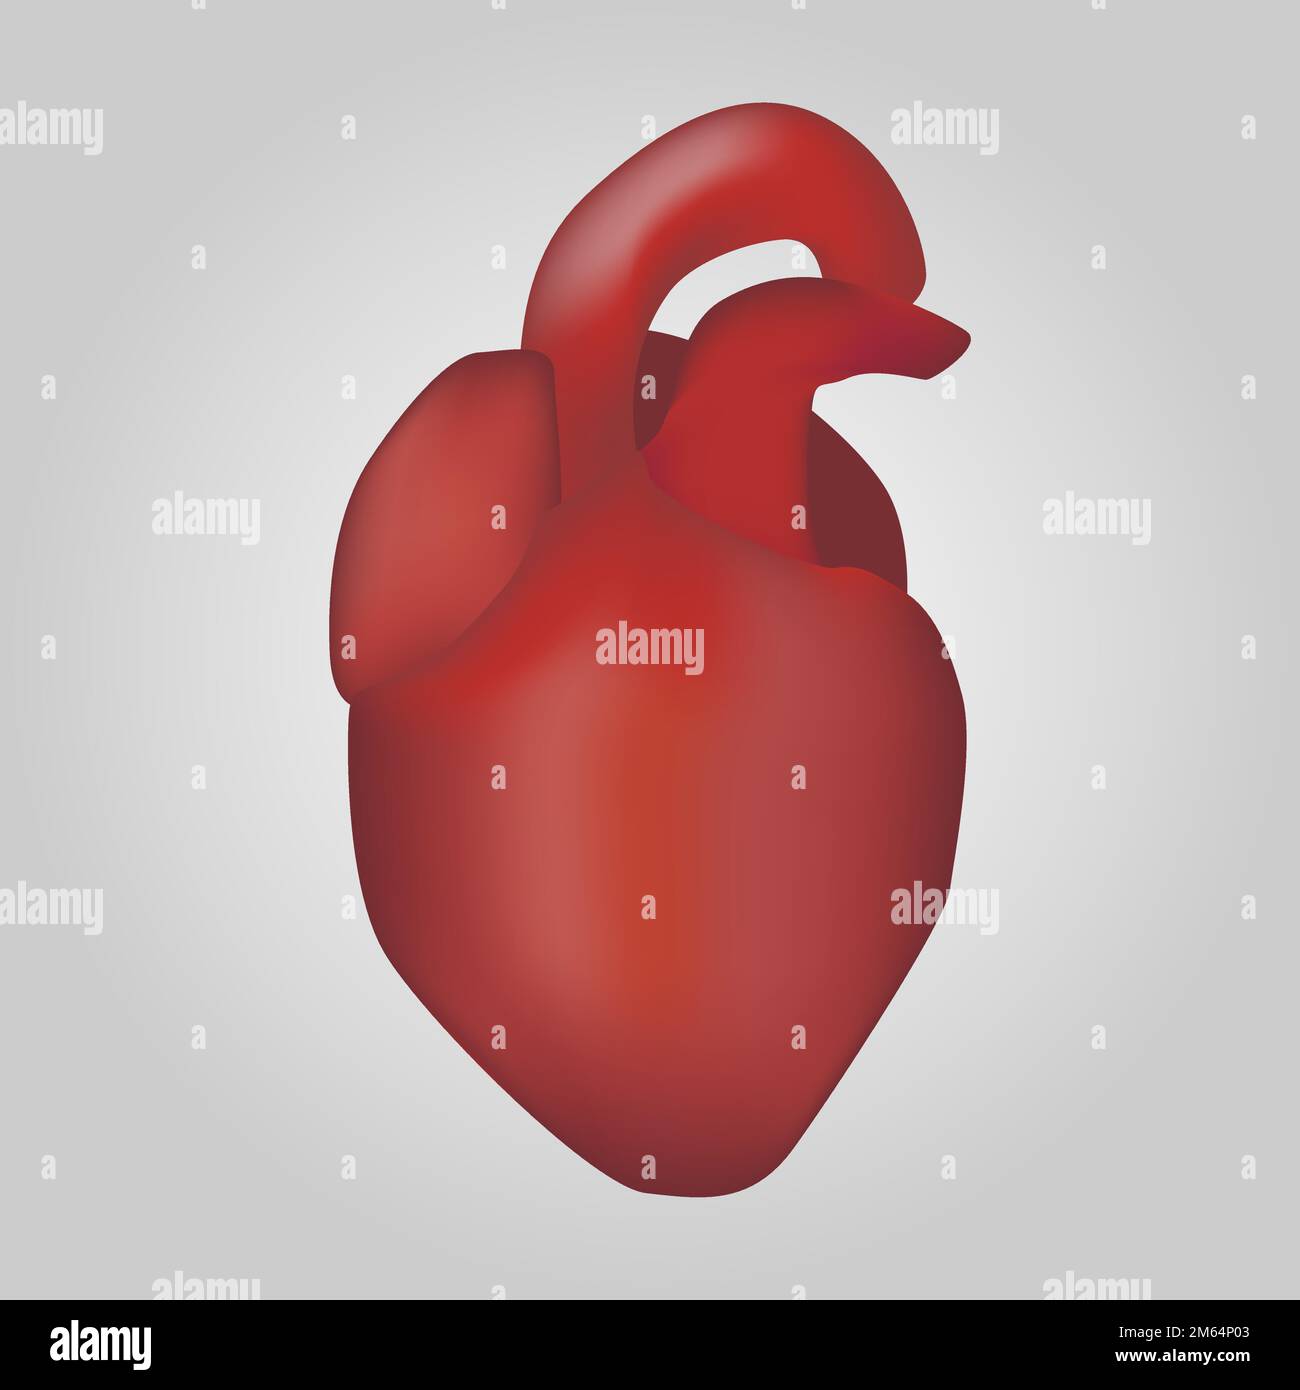 Heart of human . Cardiovascular system . Realistic design . Isolated . Vector illustration . Stock Vector